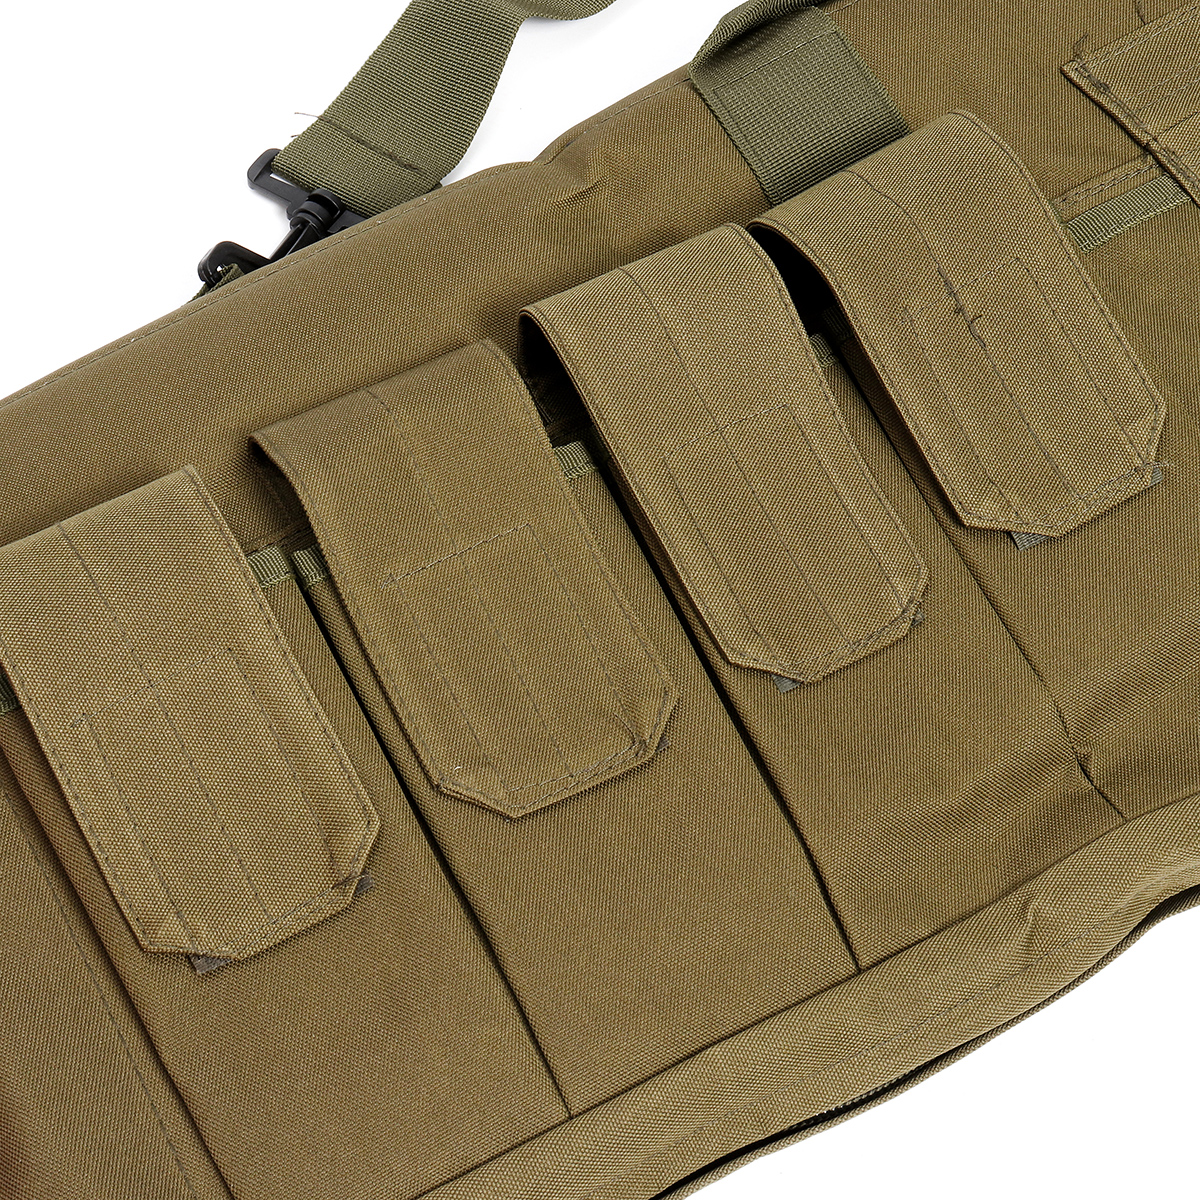 100x25x5cm-Outdoor-Hunting-Tactical-Bag-CS-Airsoft-Case-Tactical-Package-Heavy-Duty-Hunting-Accessor-1519991-7